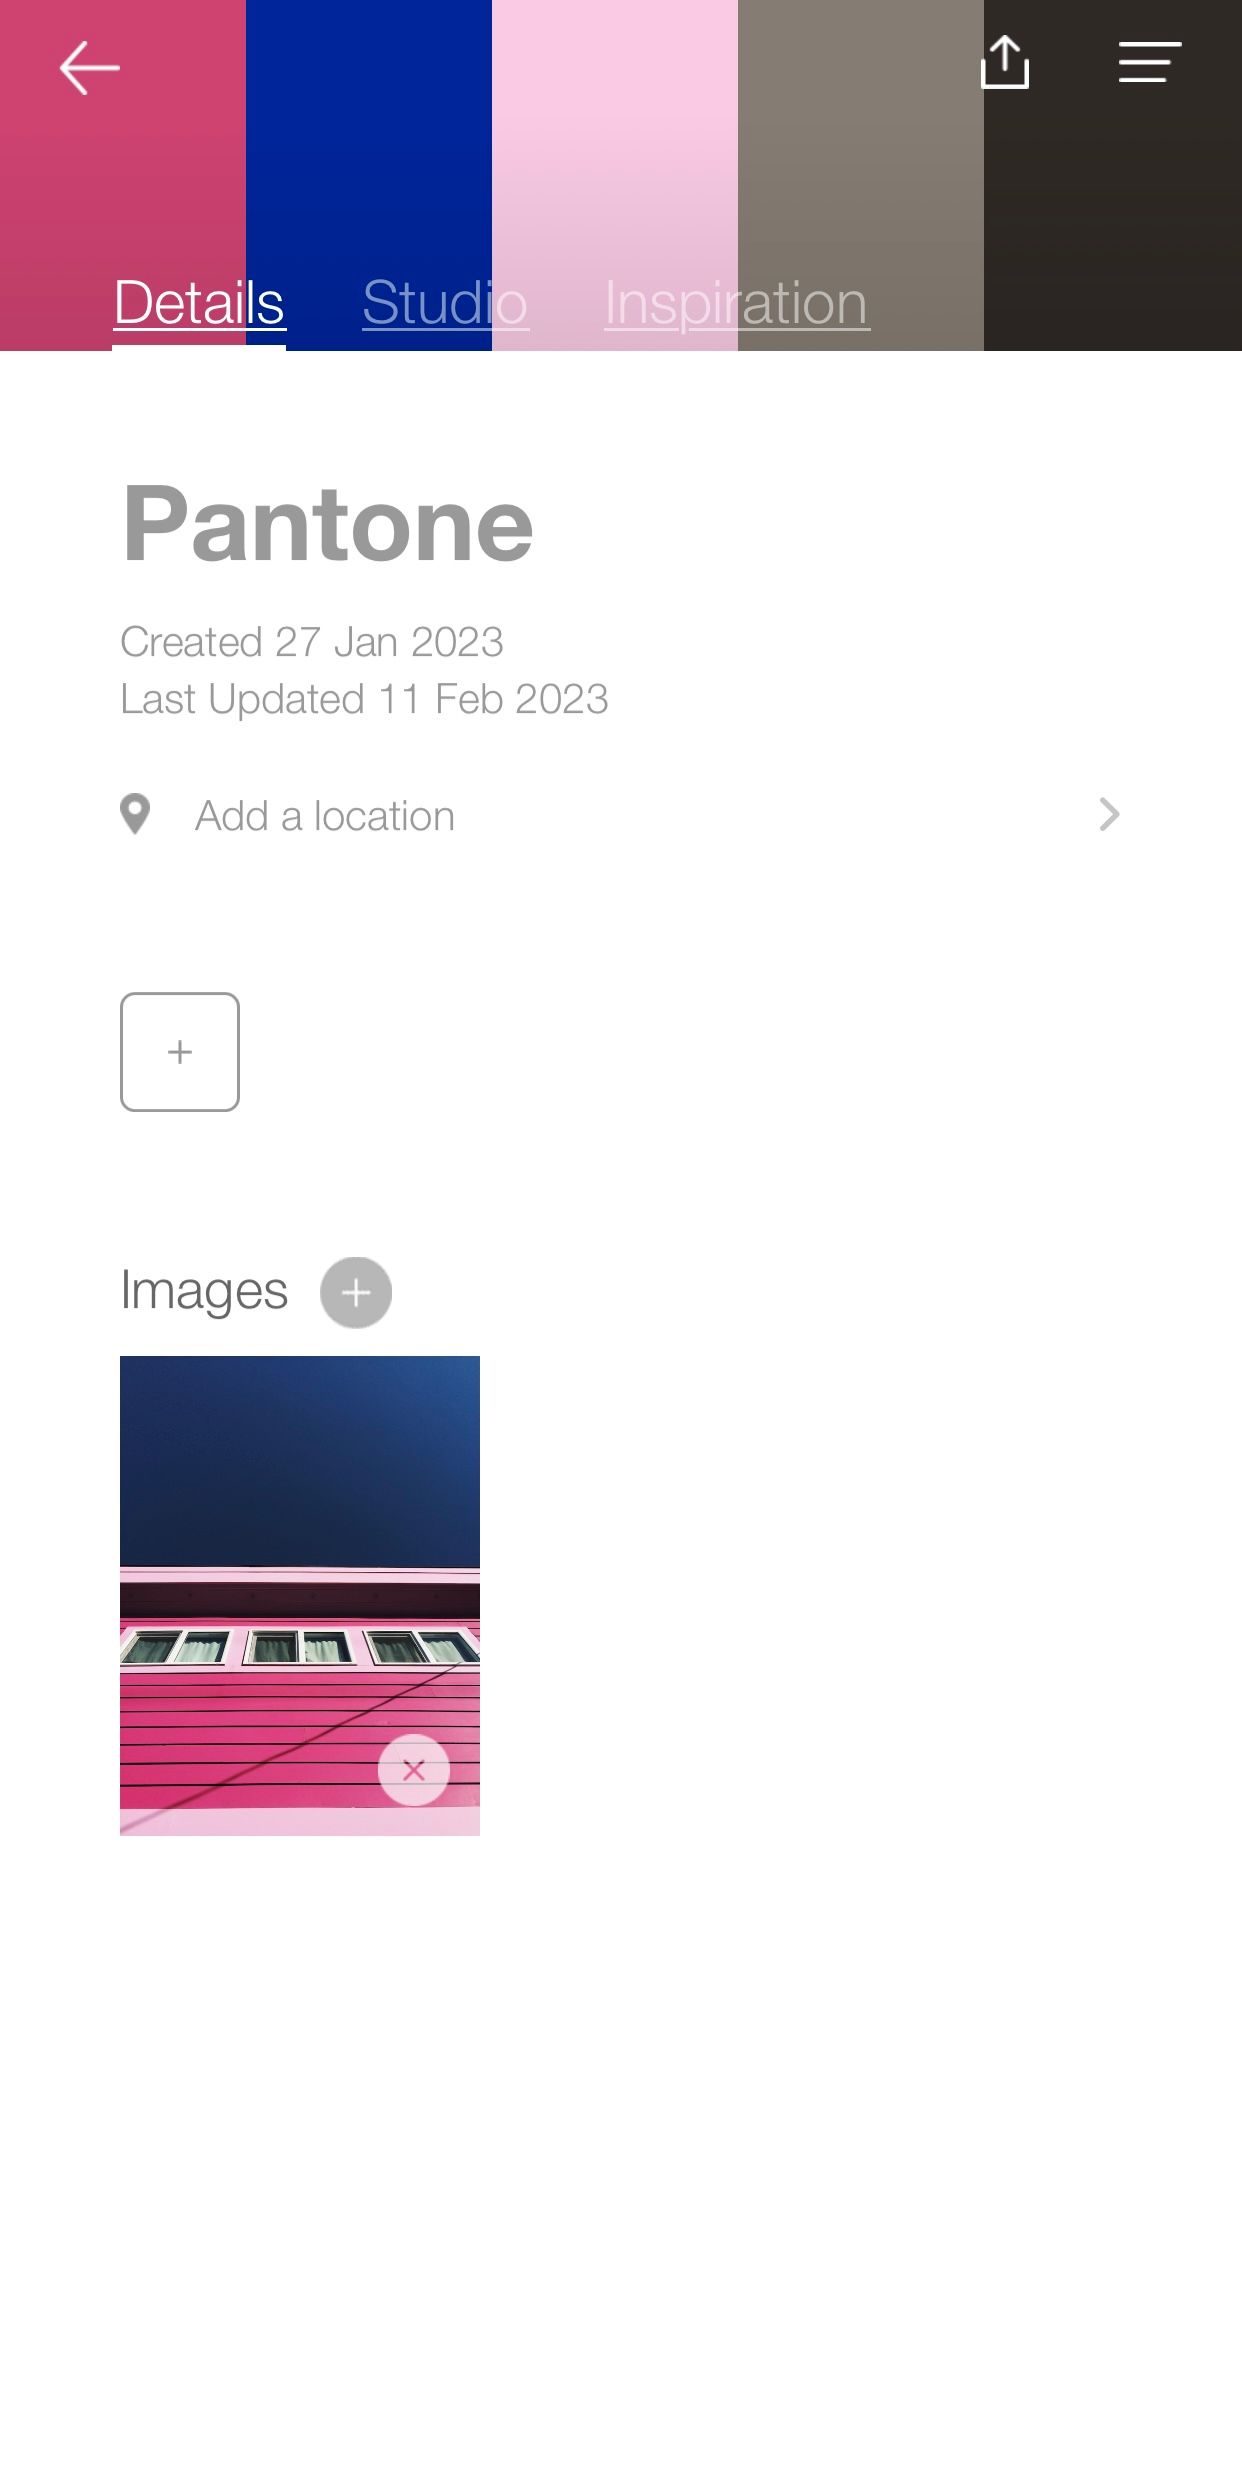 Add details section on Pantone Studio for newly created color palette